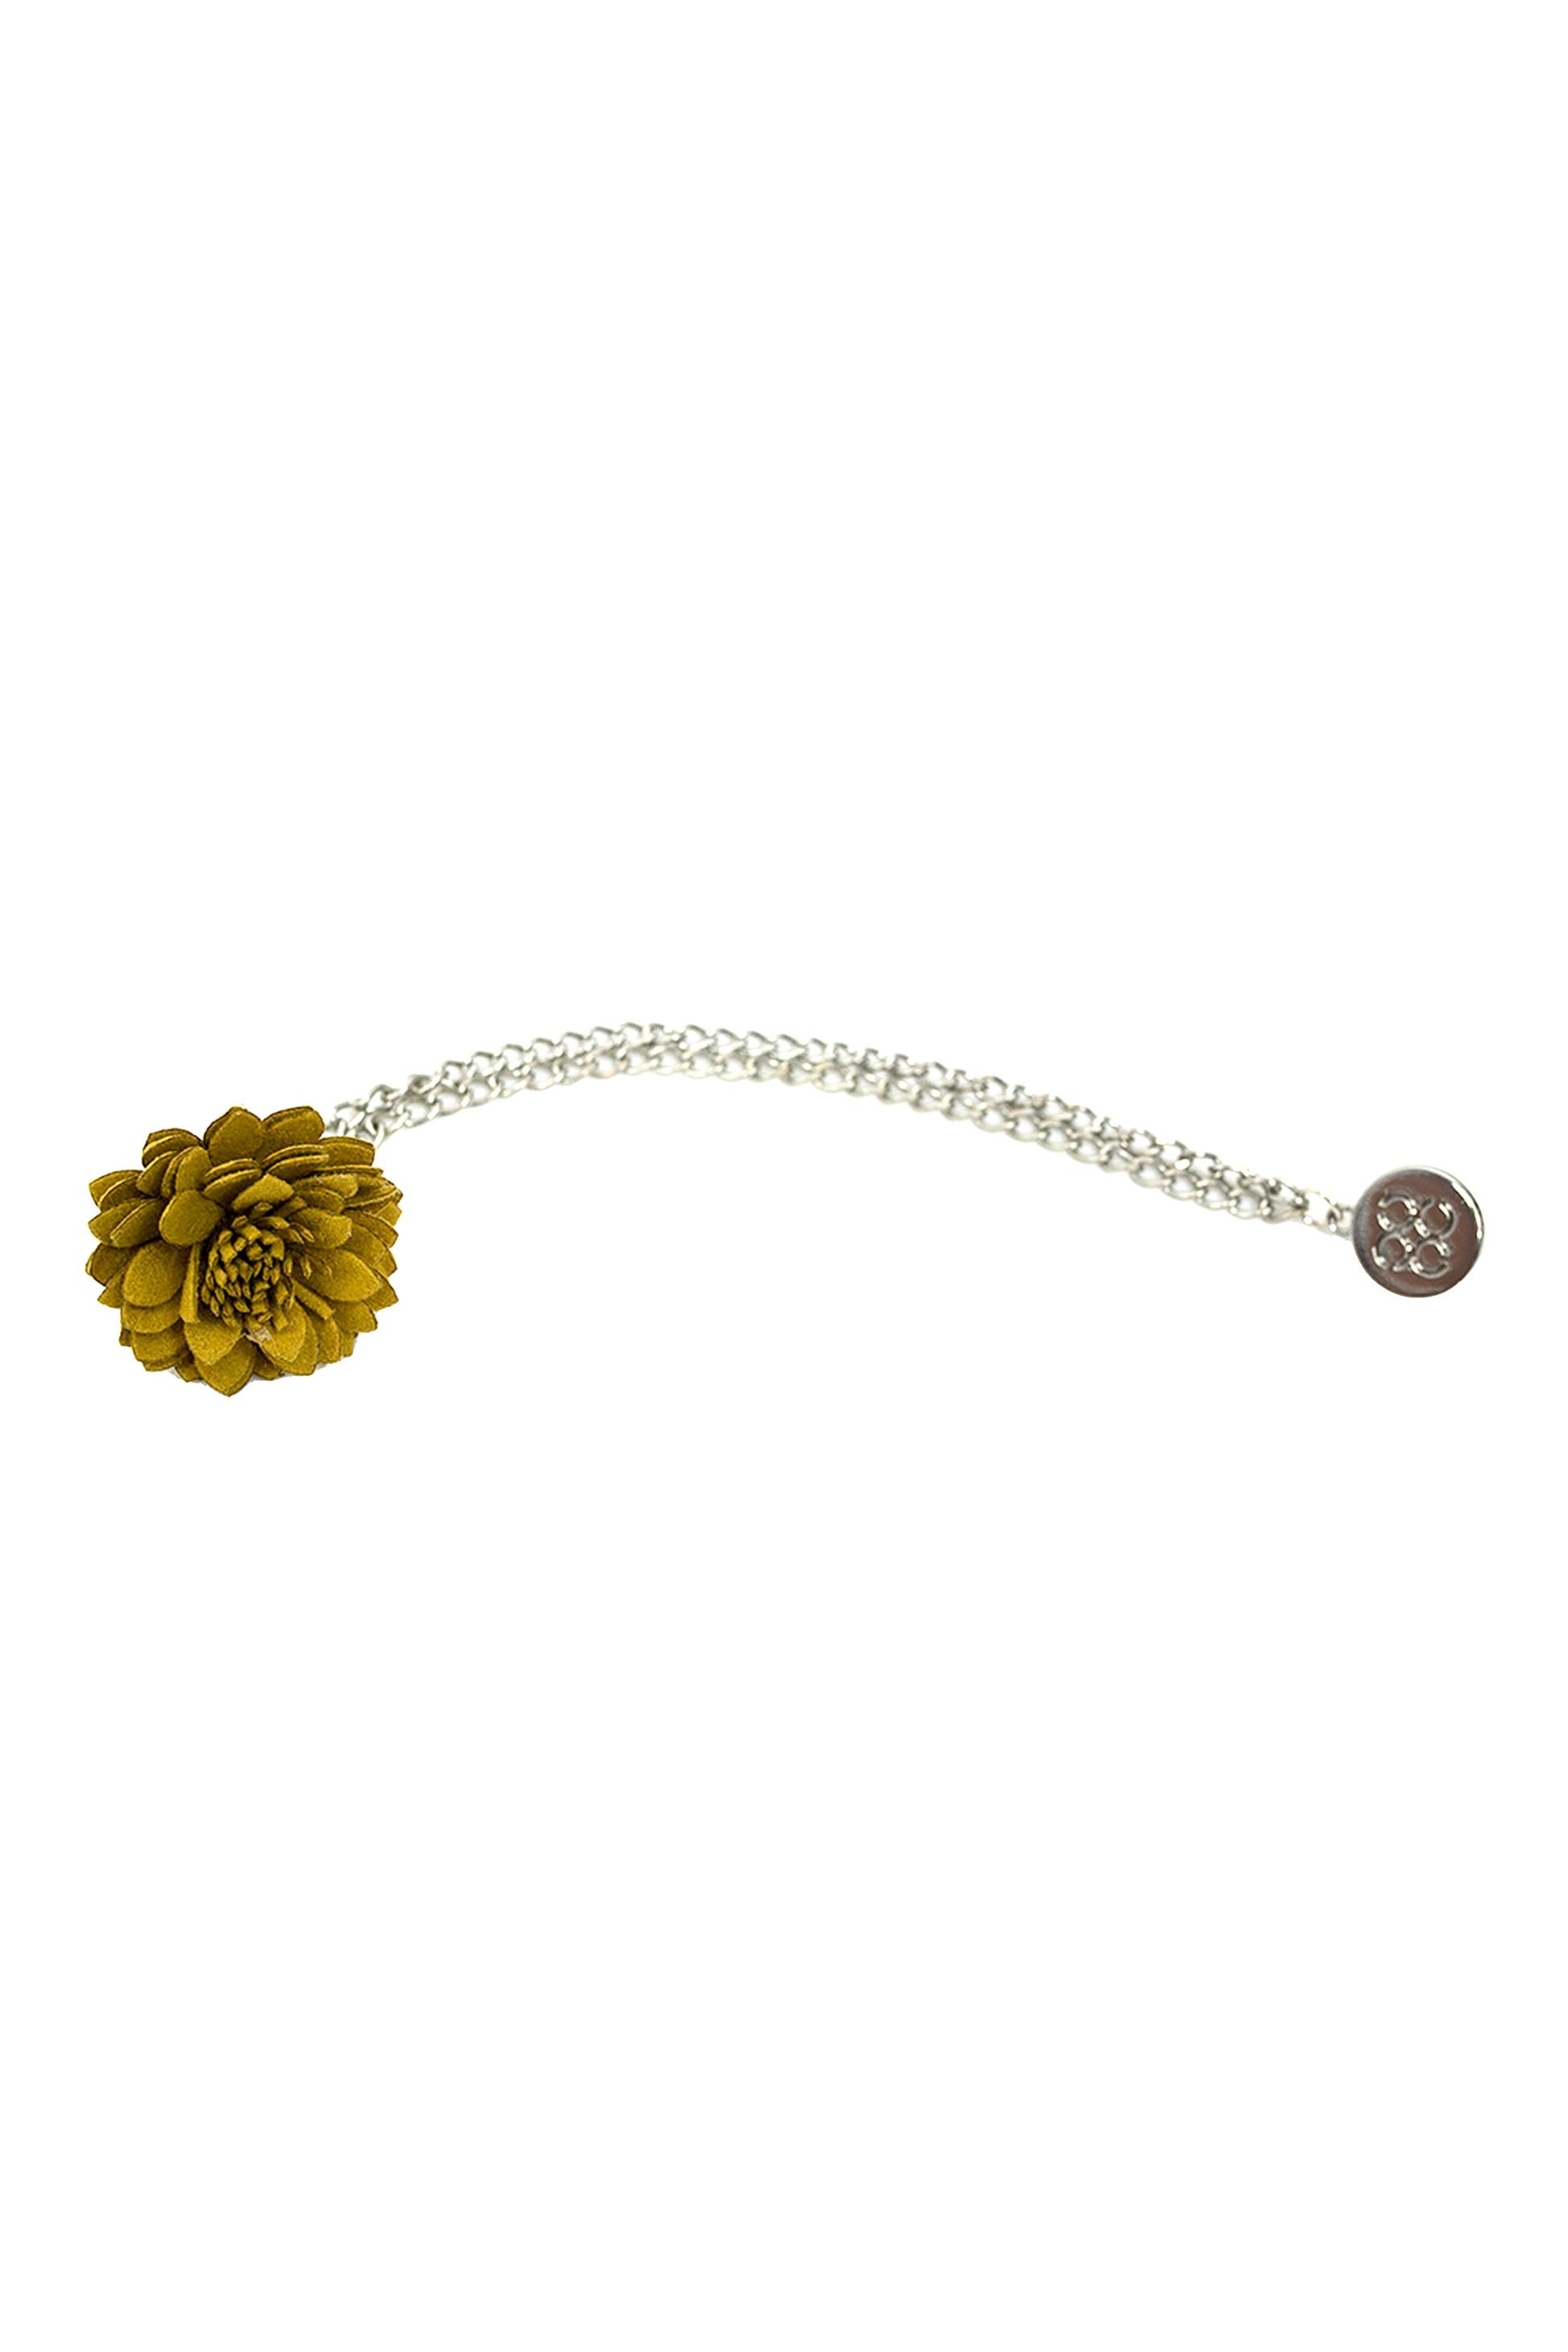 Unisex Flower Chain Brooch Suit Accessory - Yellow